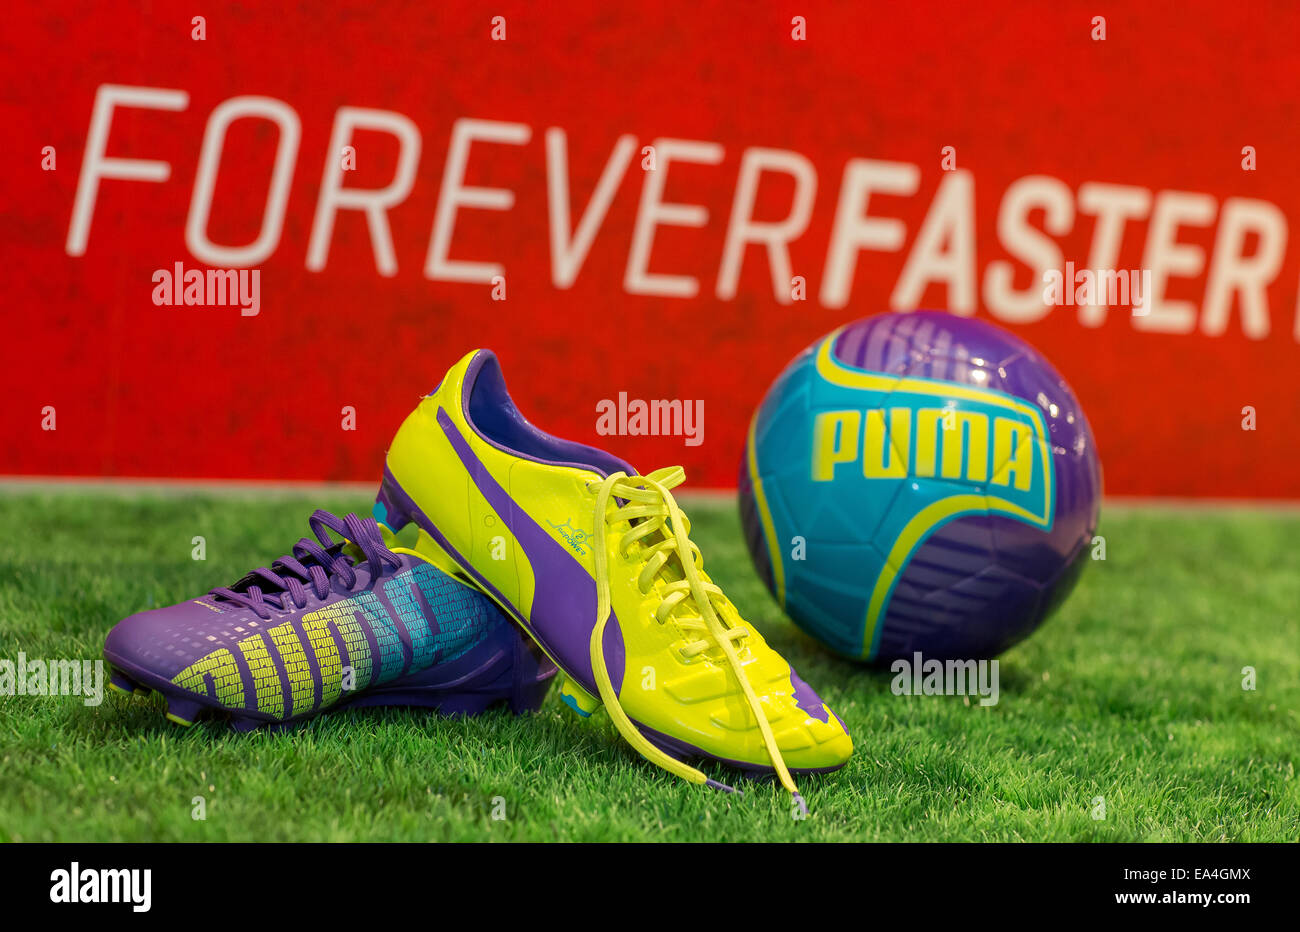 PUMA football boot evoSPEED (l.) and football evoPOWER lying together with  a football on the grass with Forever Faster slogan in the background.  COMMERCIAL HANDOUT/EDITORIAL USE ONLY/NO SALES. Please quote the source 